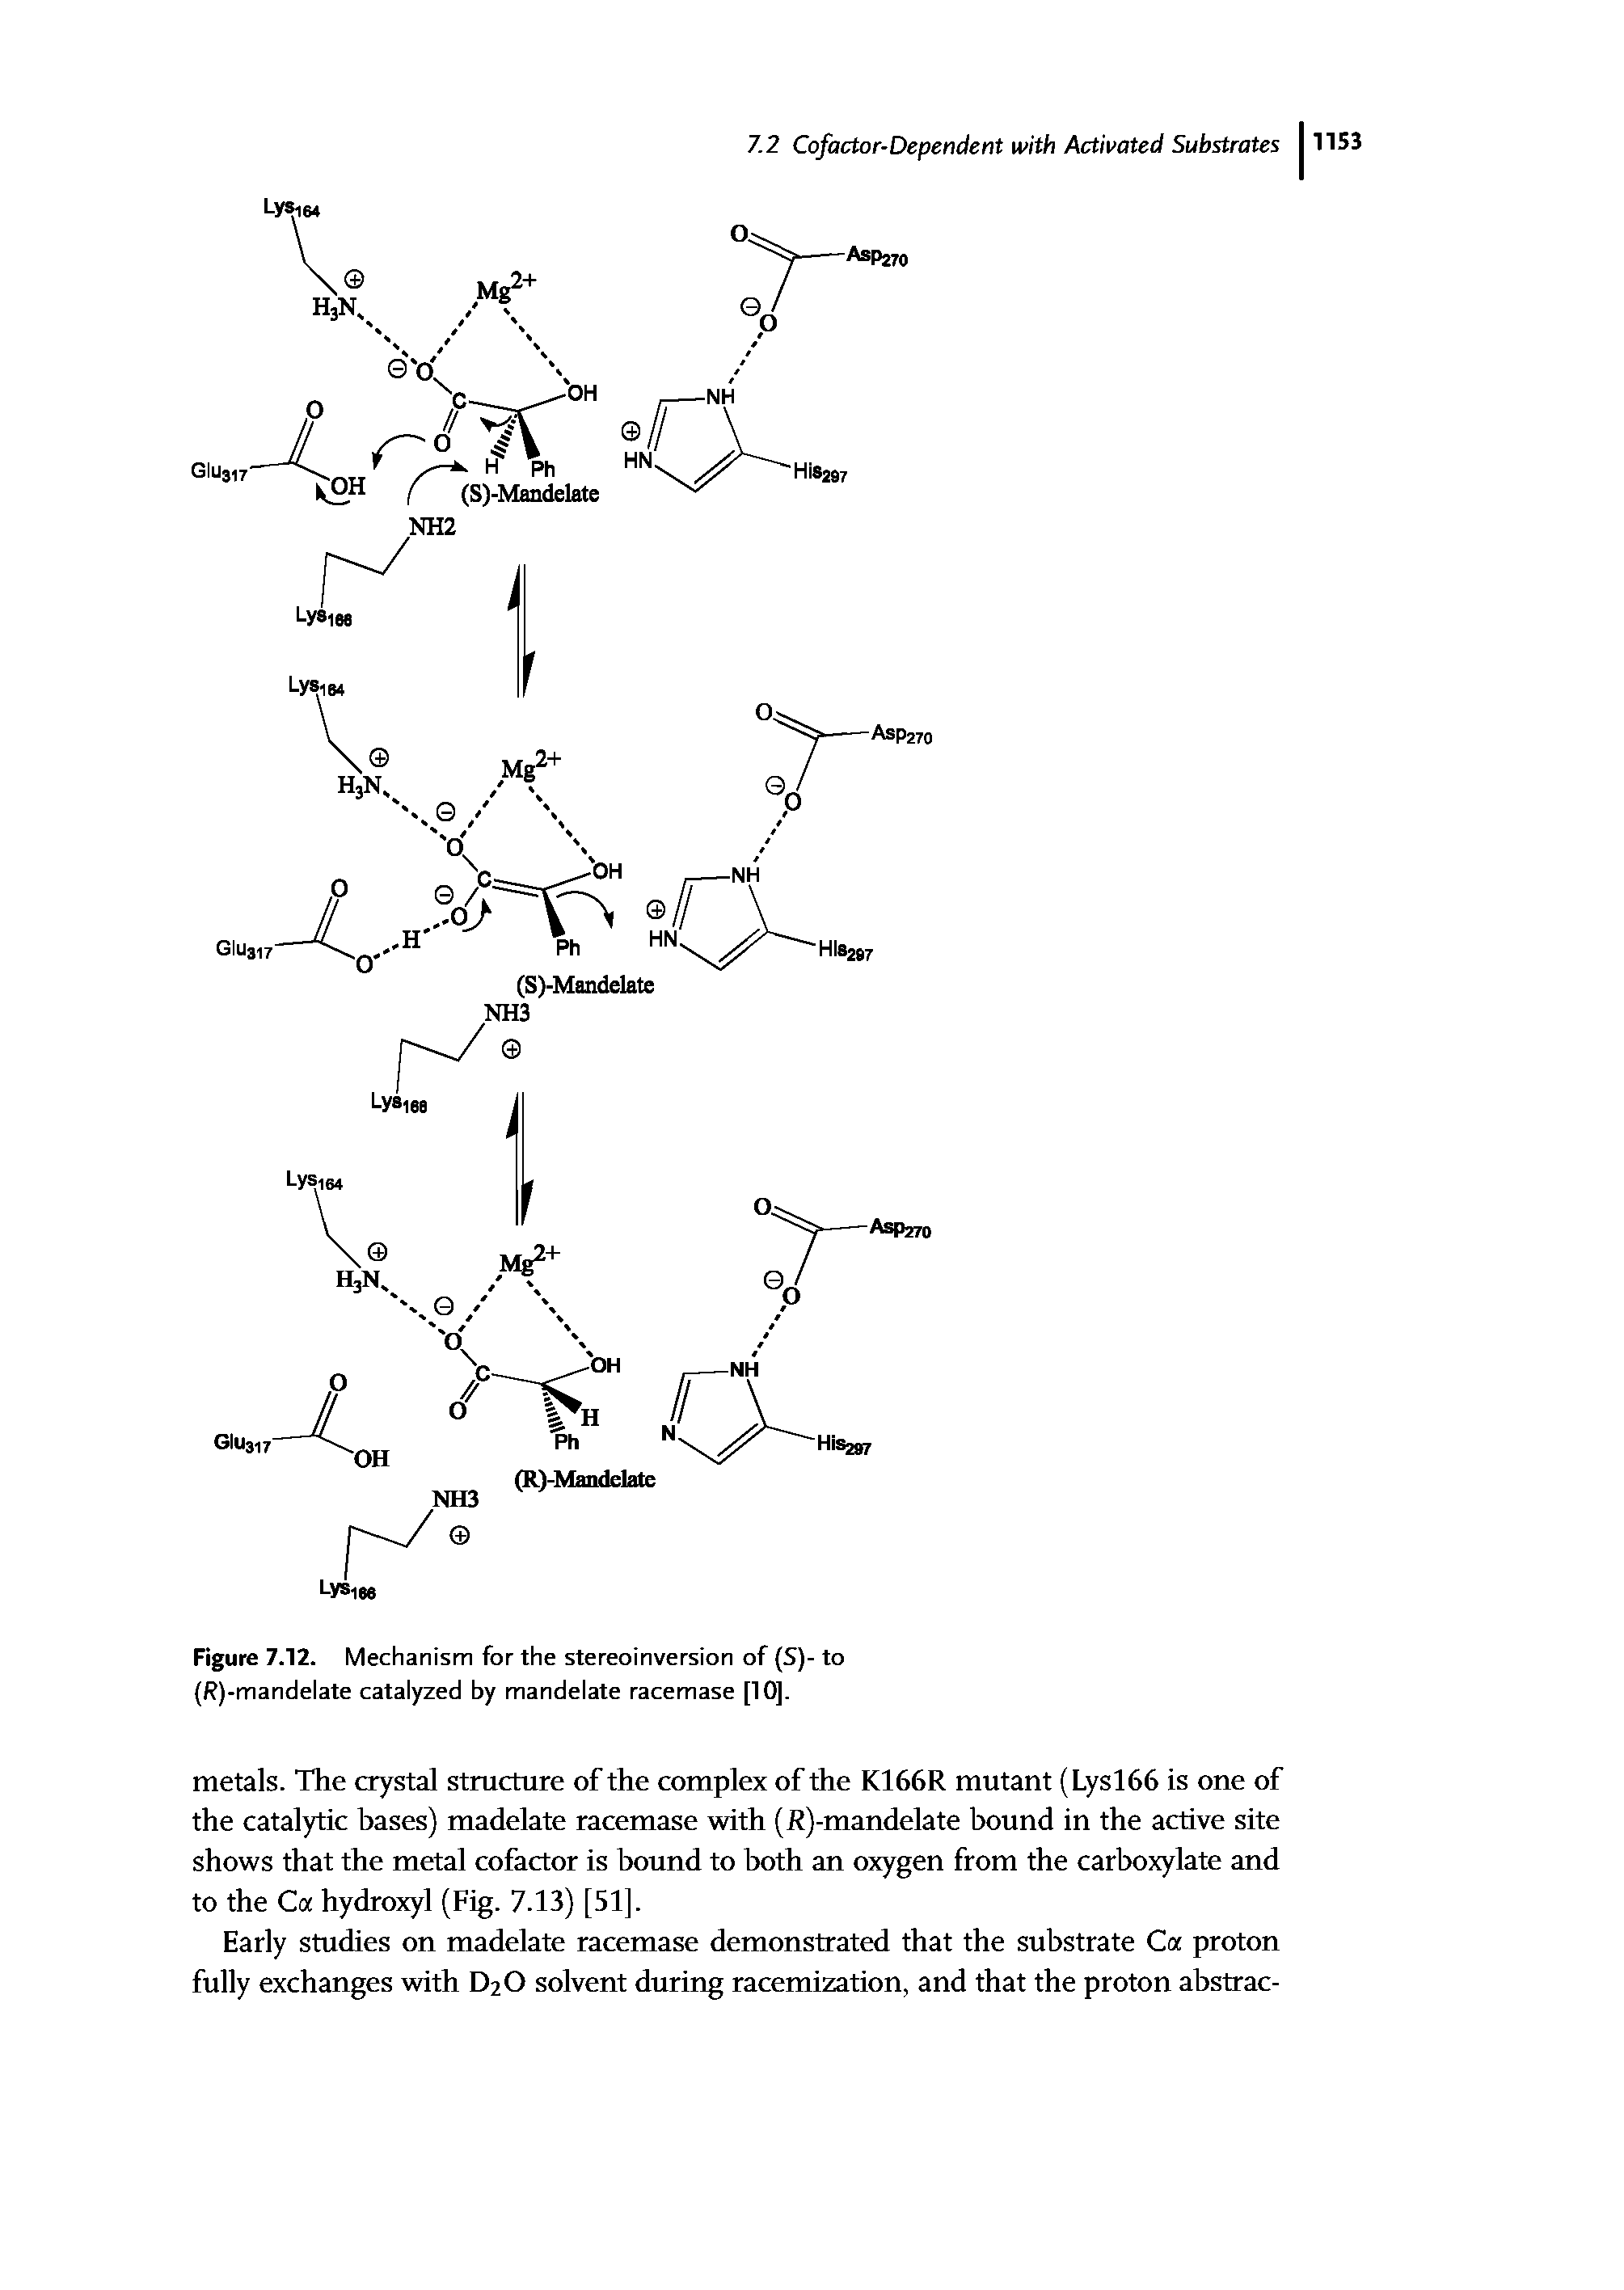 Figure 7.12. Mechanism for the stereoinversion of (S)- to (R)-mandelate catalyzed by mandelate racemase [10],...